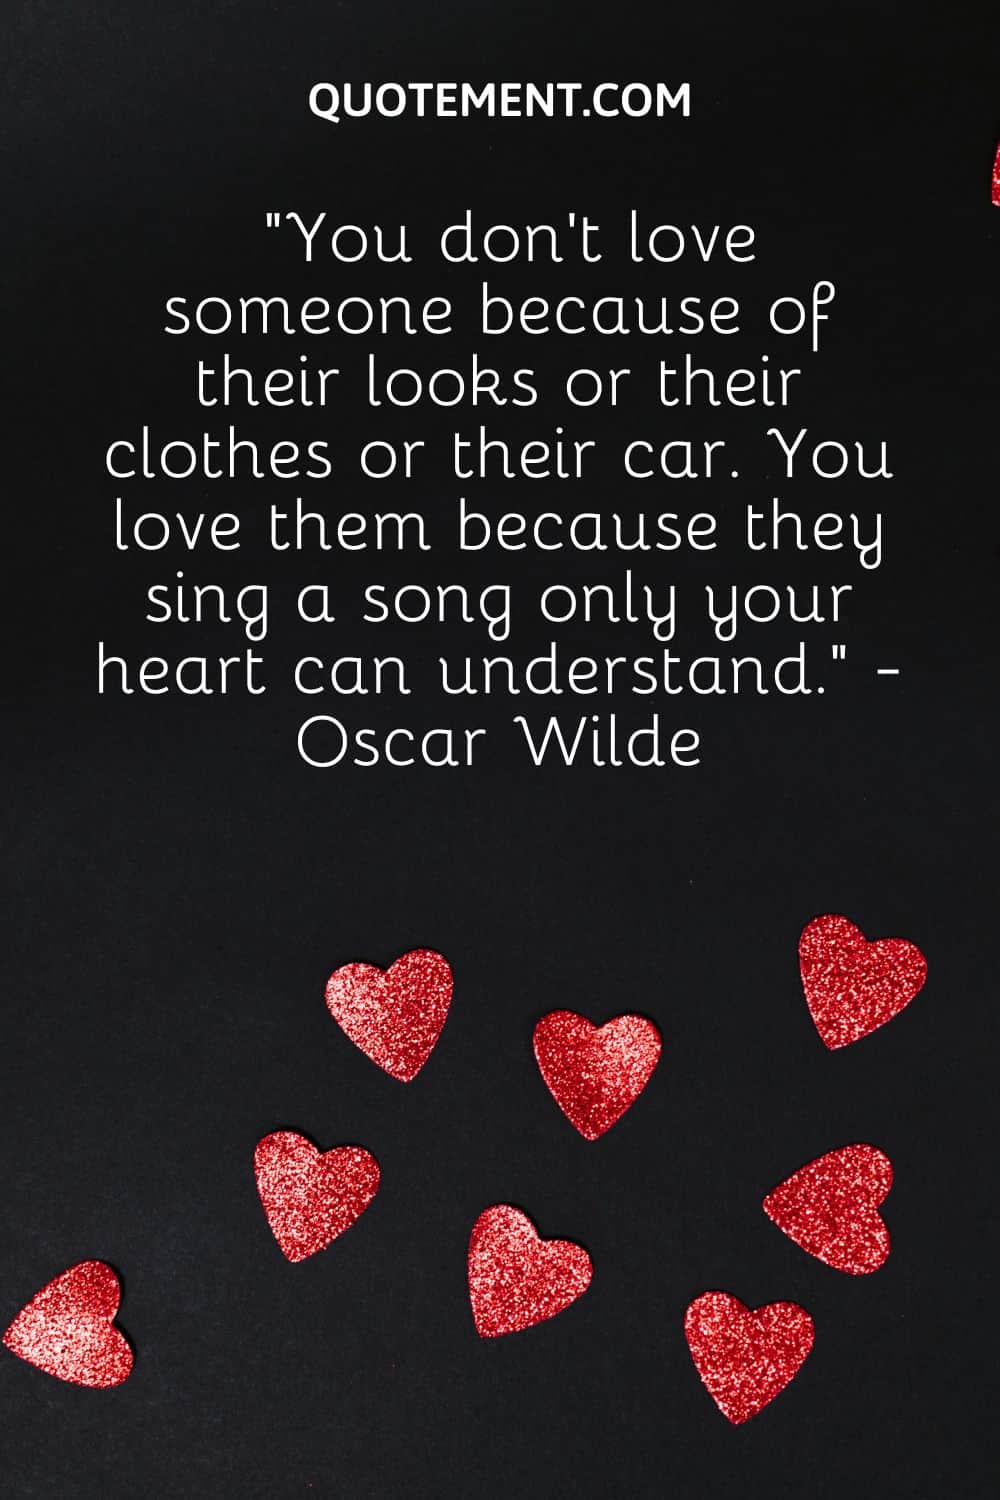 “You don’t love someone because of their looks or their clothes or their car. You love them because they sing a song only your heart can understand.” - Oscar Wilde